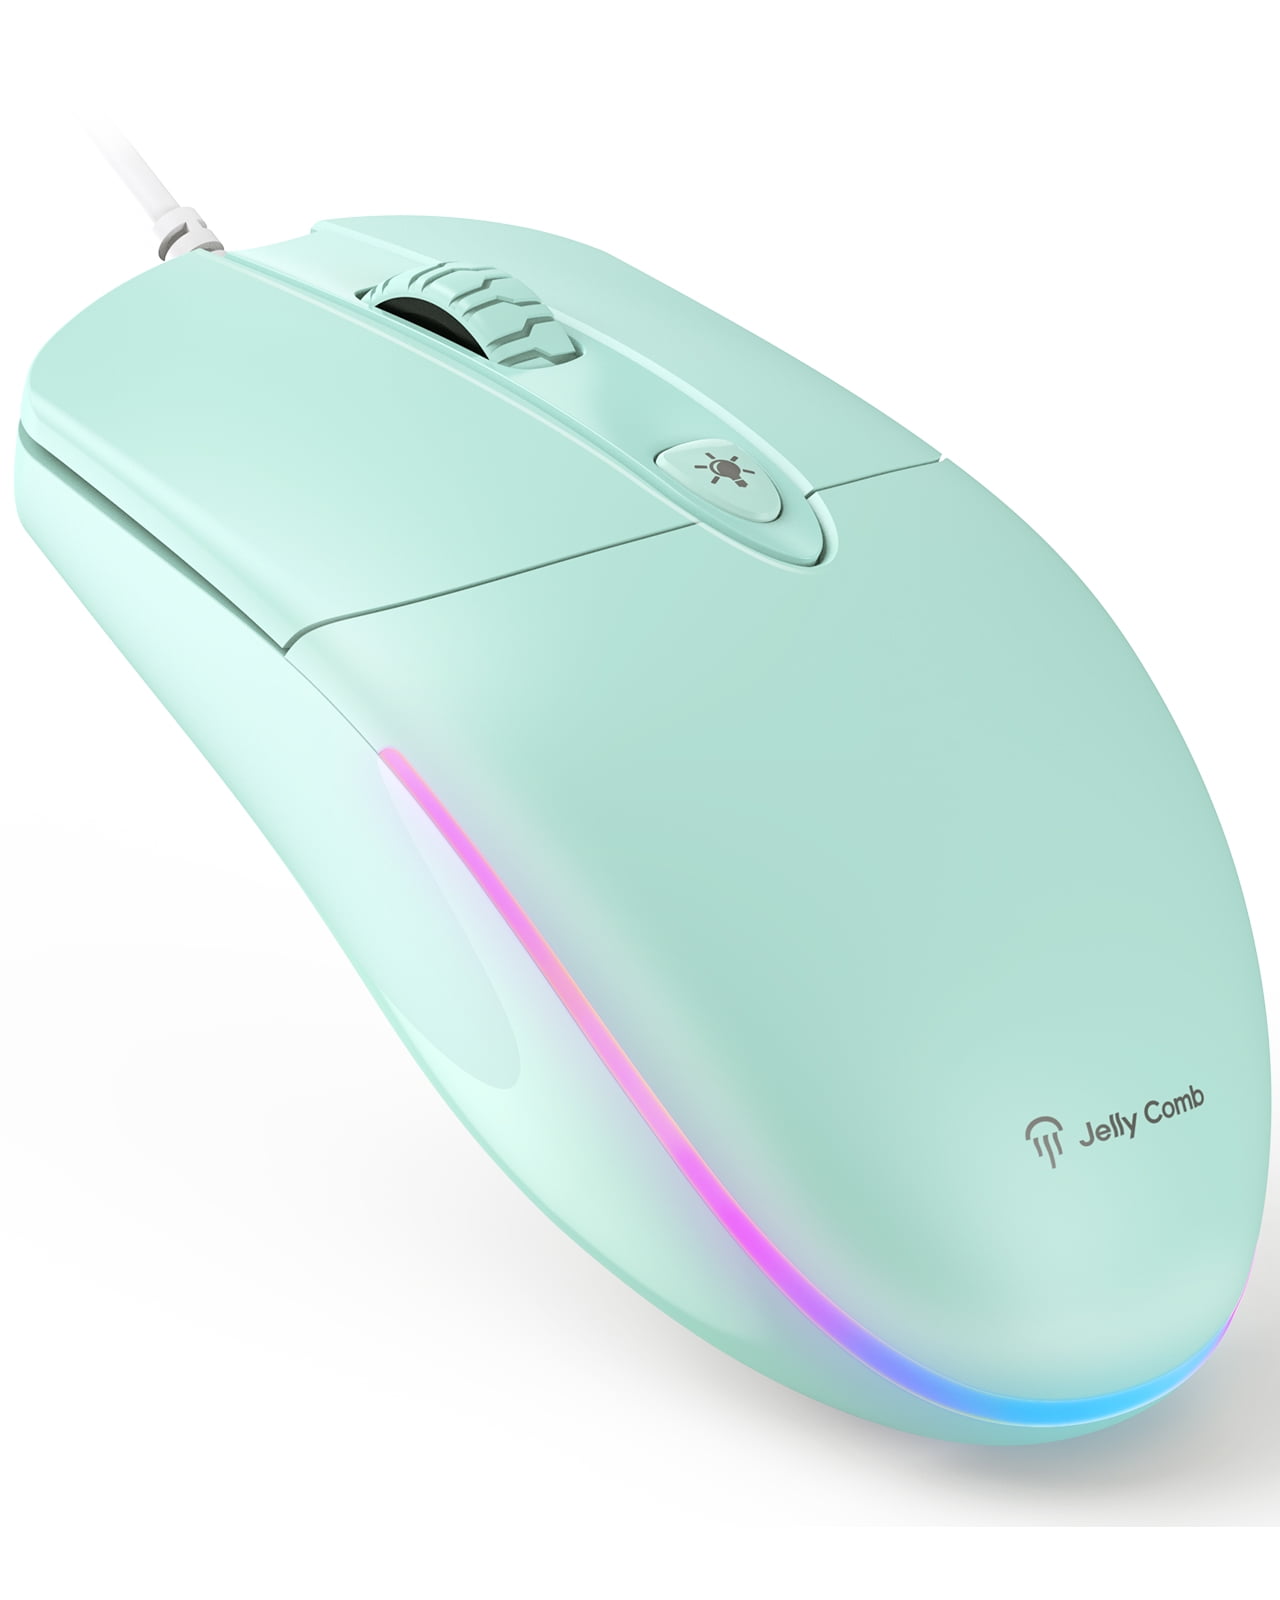 Laptop USB PC Optical Mouse Corded Mice with 7 Colors LED Backlight 4 DPI Up to 3200 DPI with Side Buttons WANGJIANGLI Wired RGB Gaming Mouse 